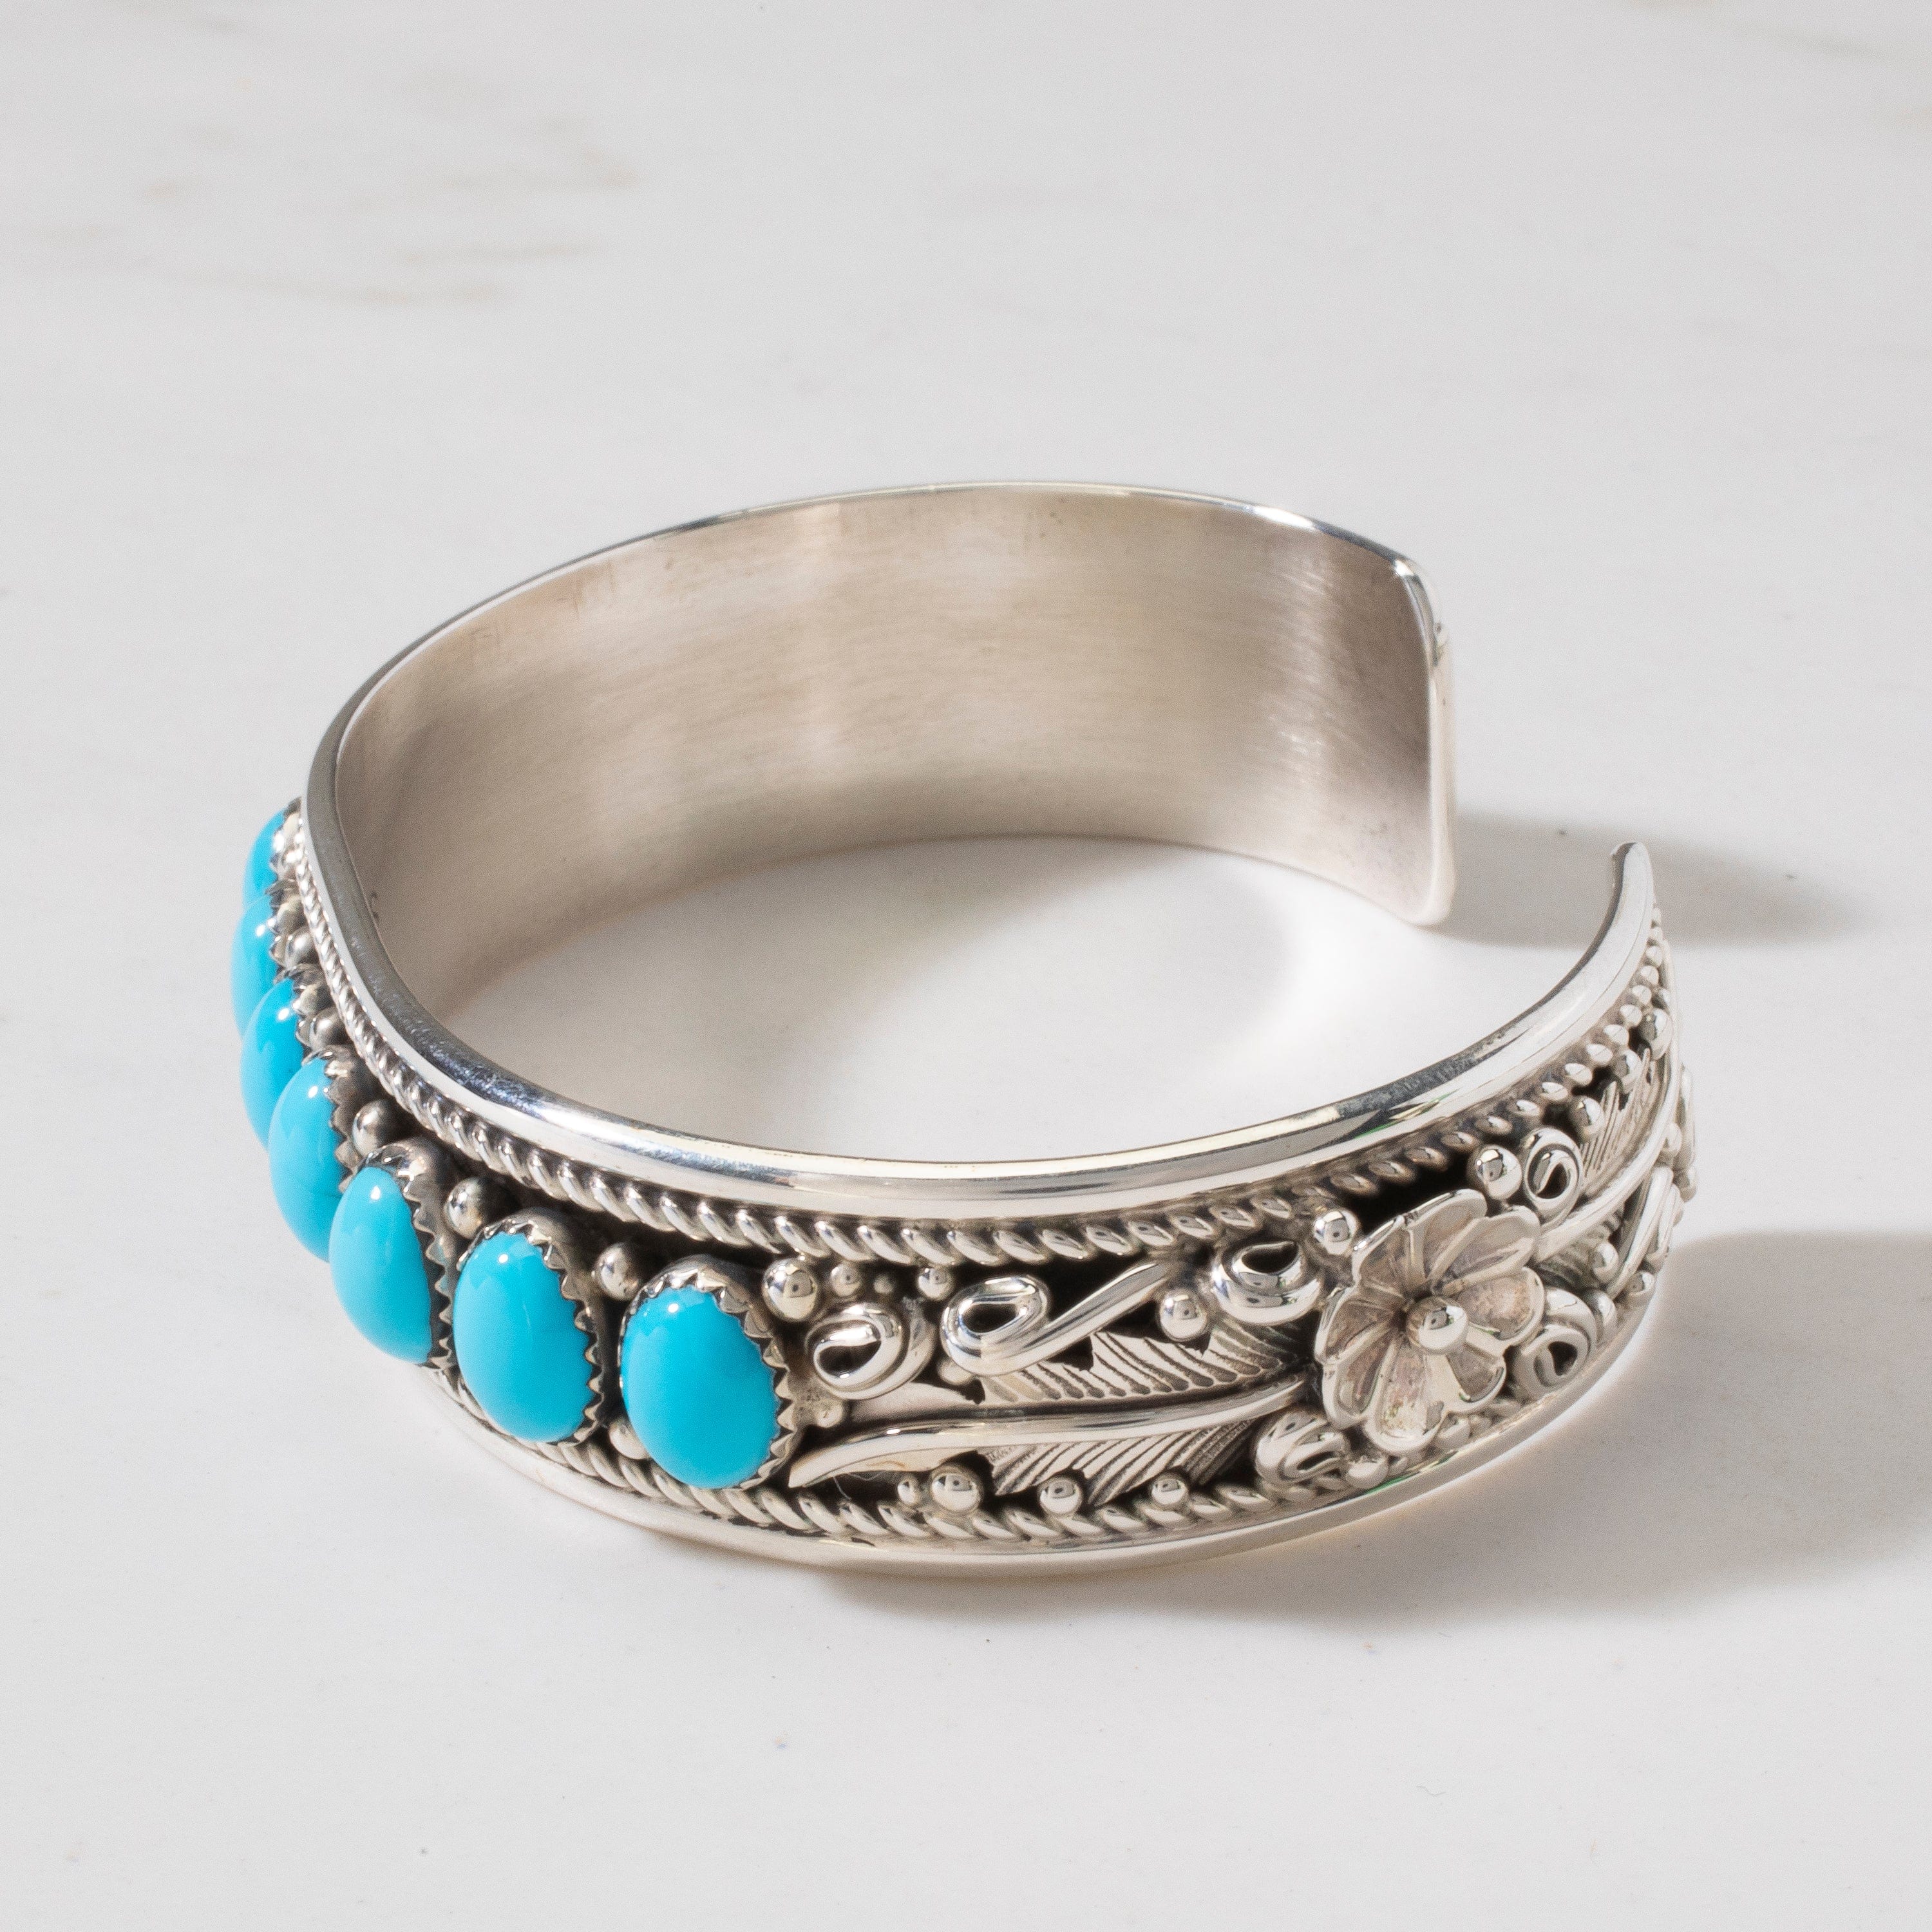 Kalifano Native American Jewelry Evelyne & Edwards James Sleeping Beauty Turquoise Navajo USA Native American Made 925 Sterling Silver Cuff NAB1400.004